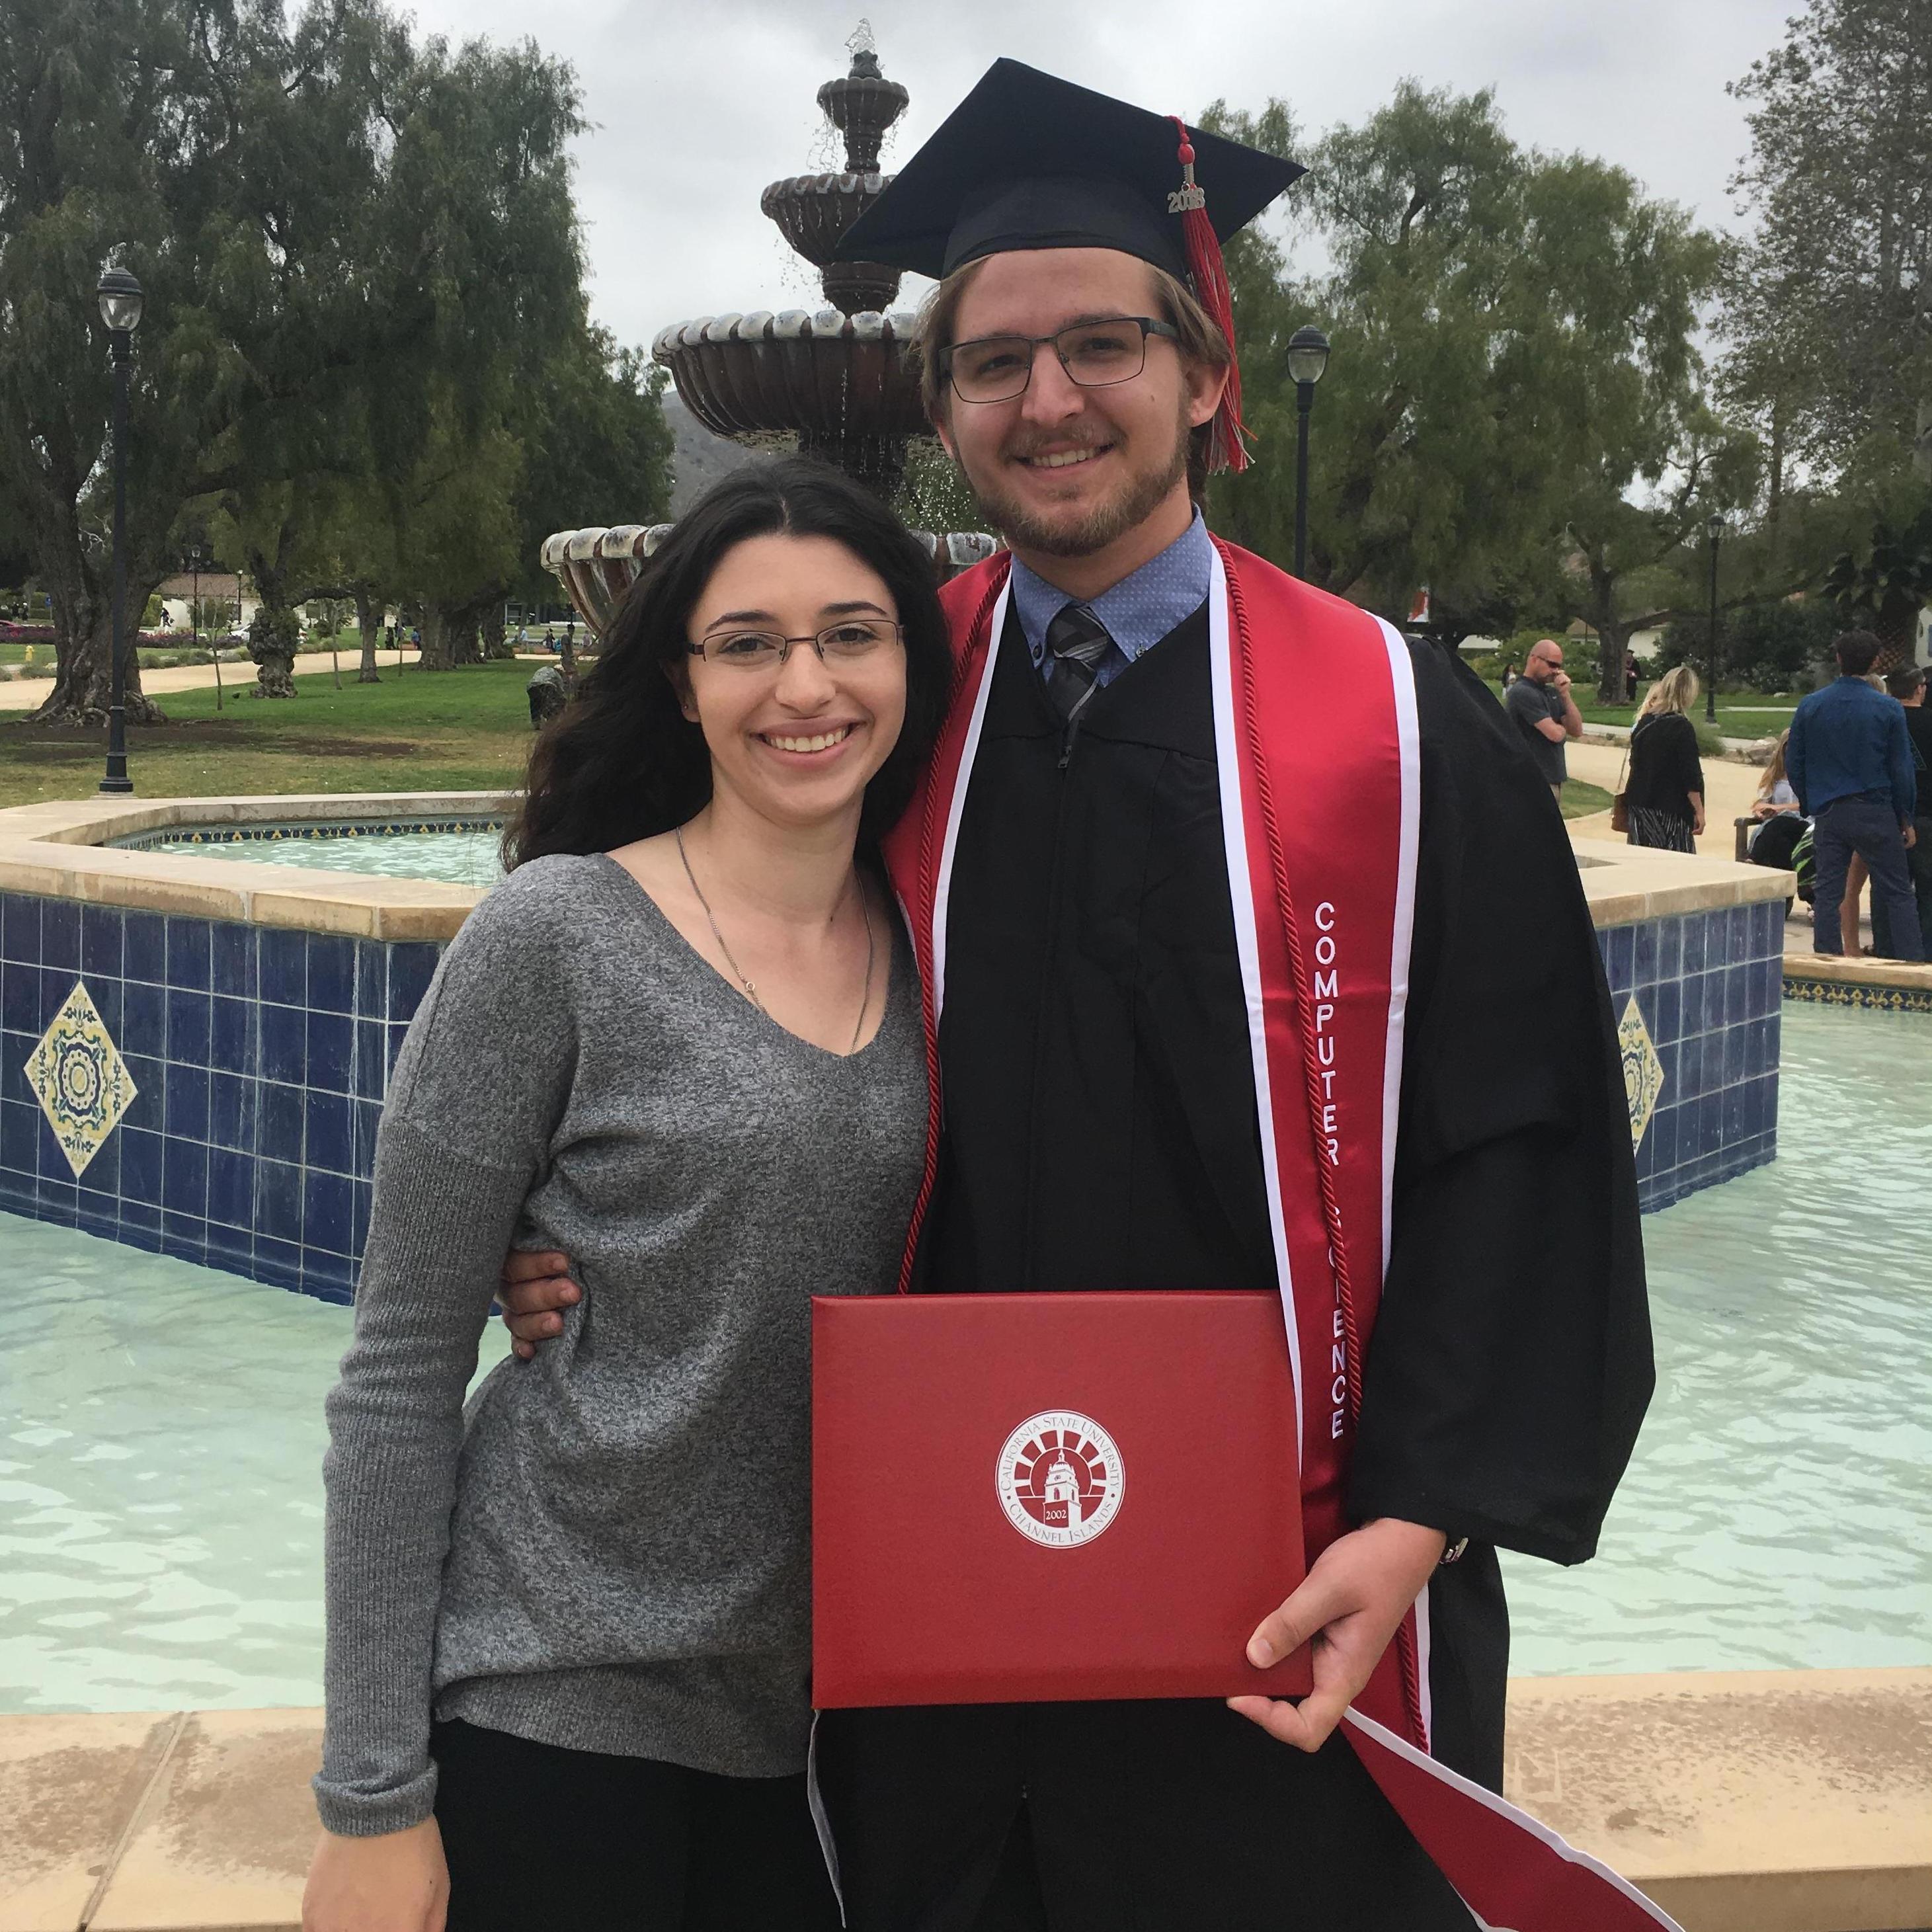 Shawn's graduation from CSU Channel Islands in Spring 2018.